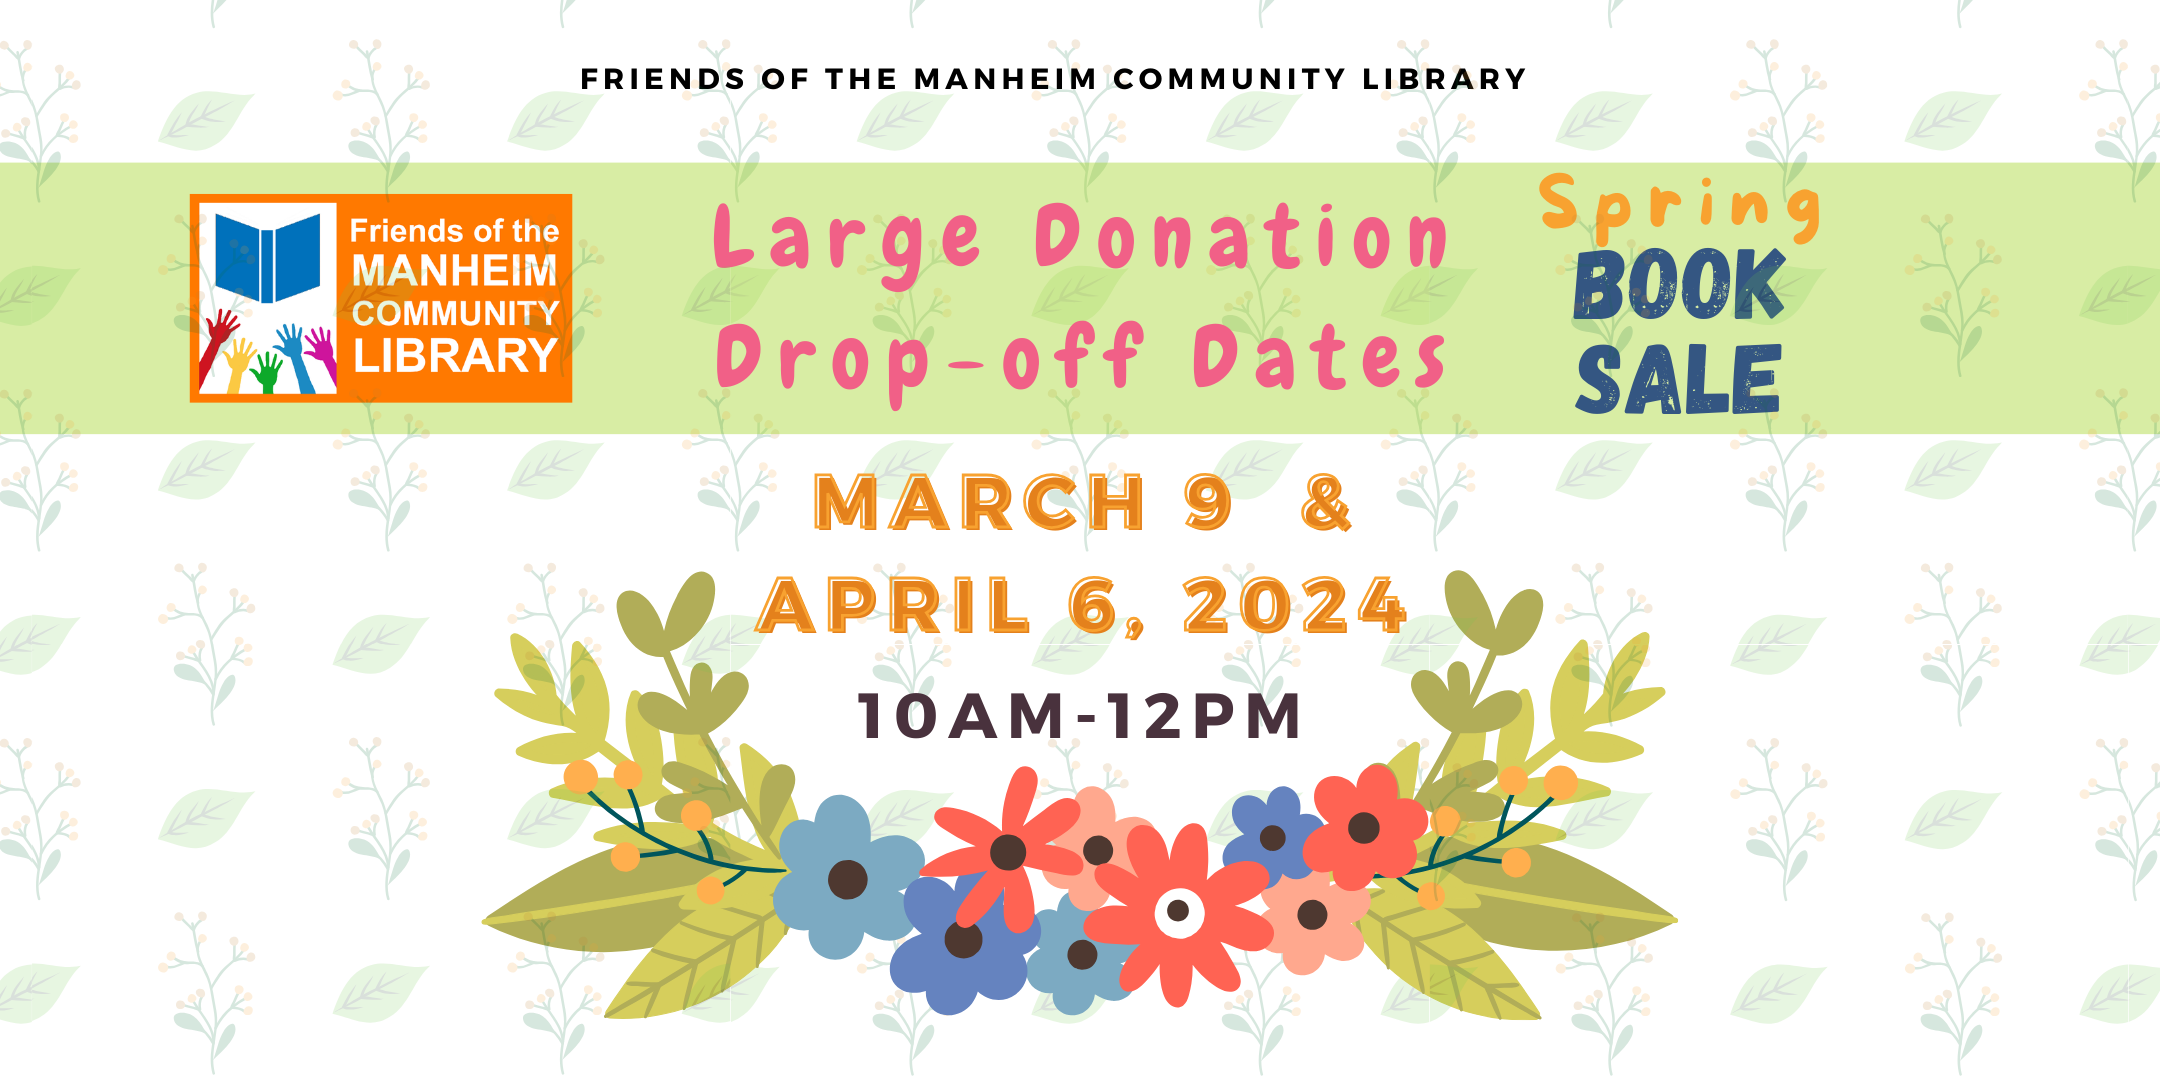 Large Donation Drop-off dates on March 9th and April 6th at 10am-12pm